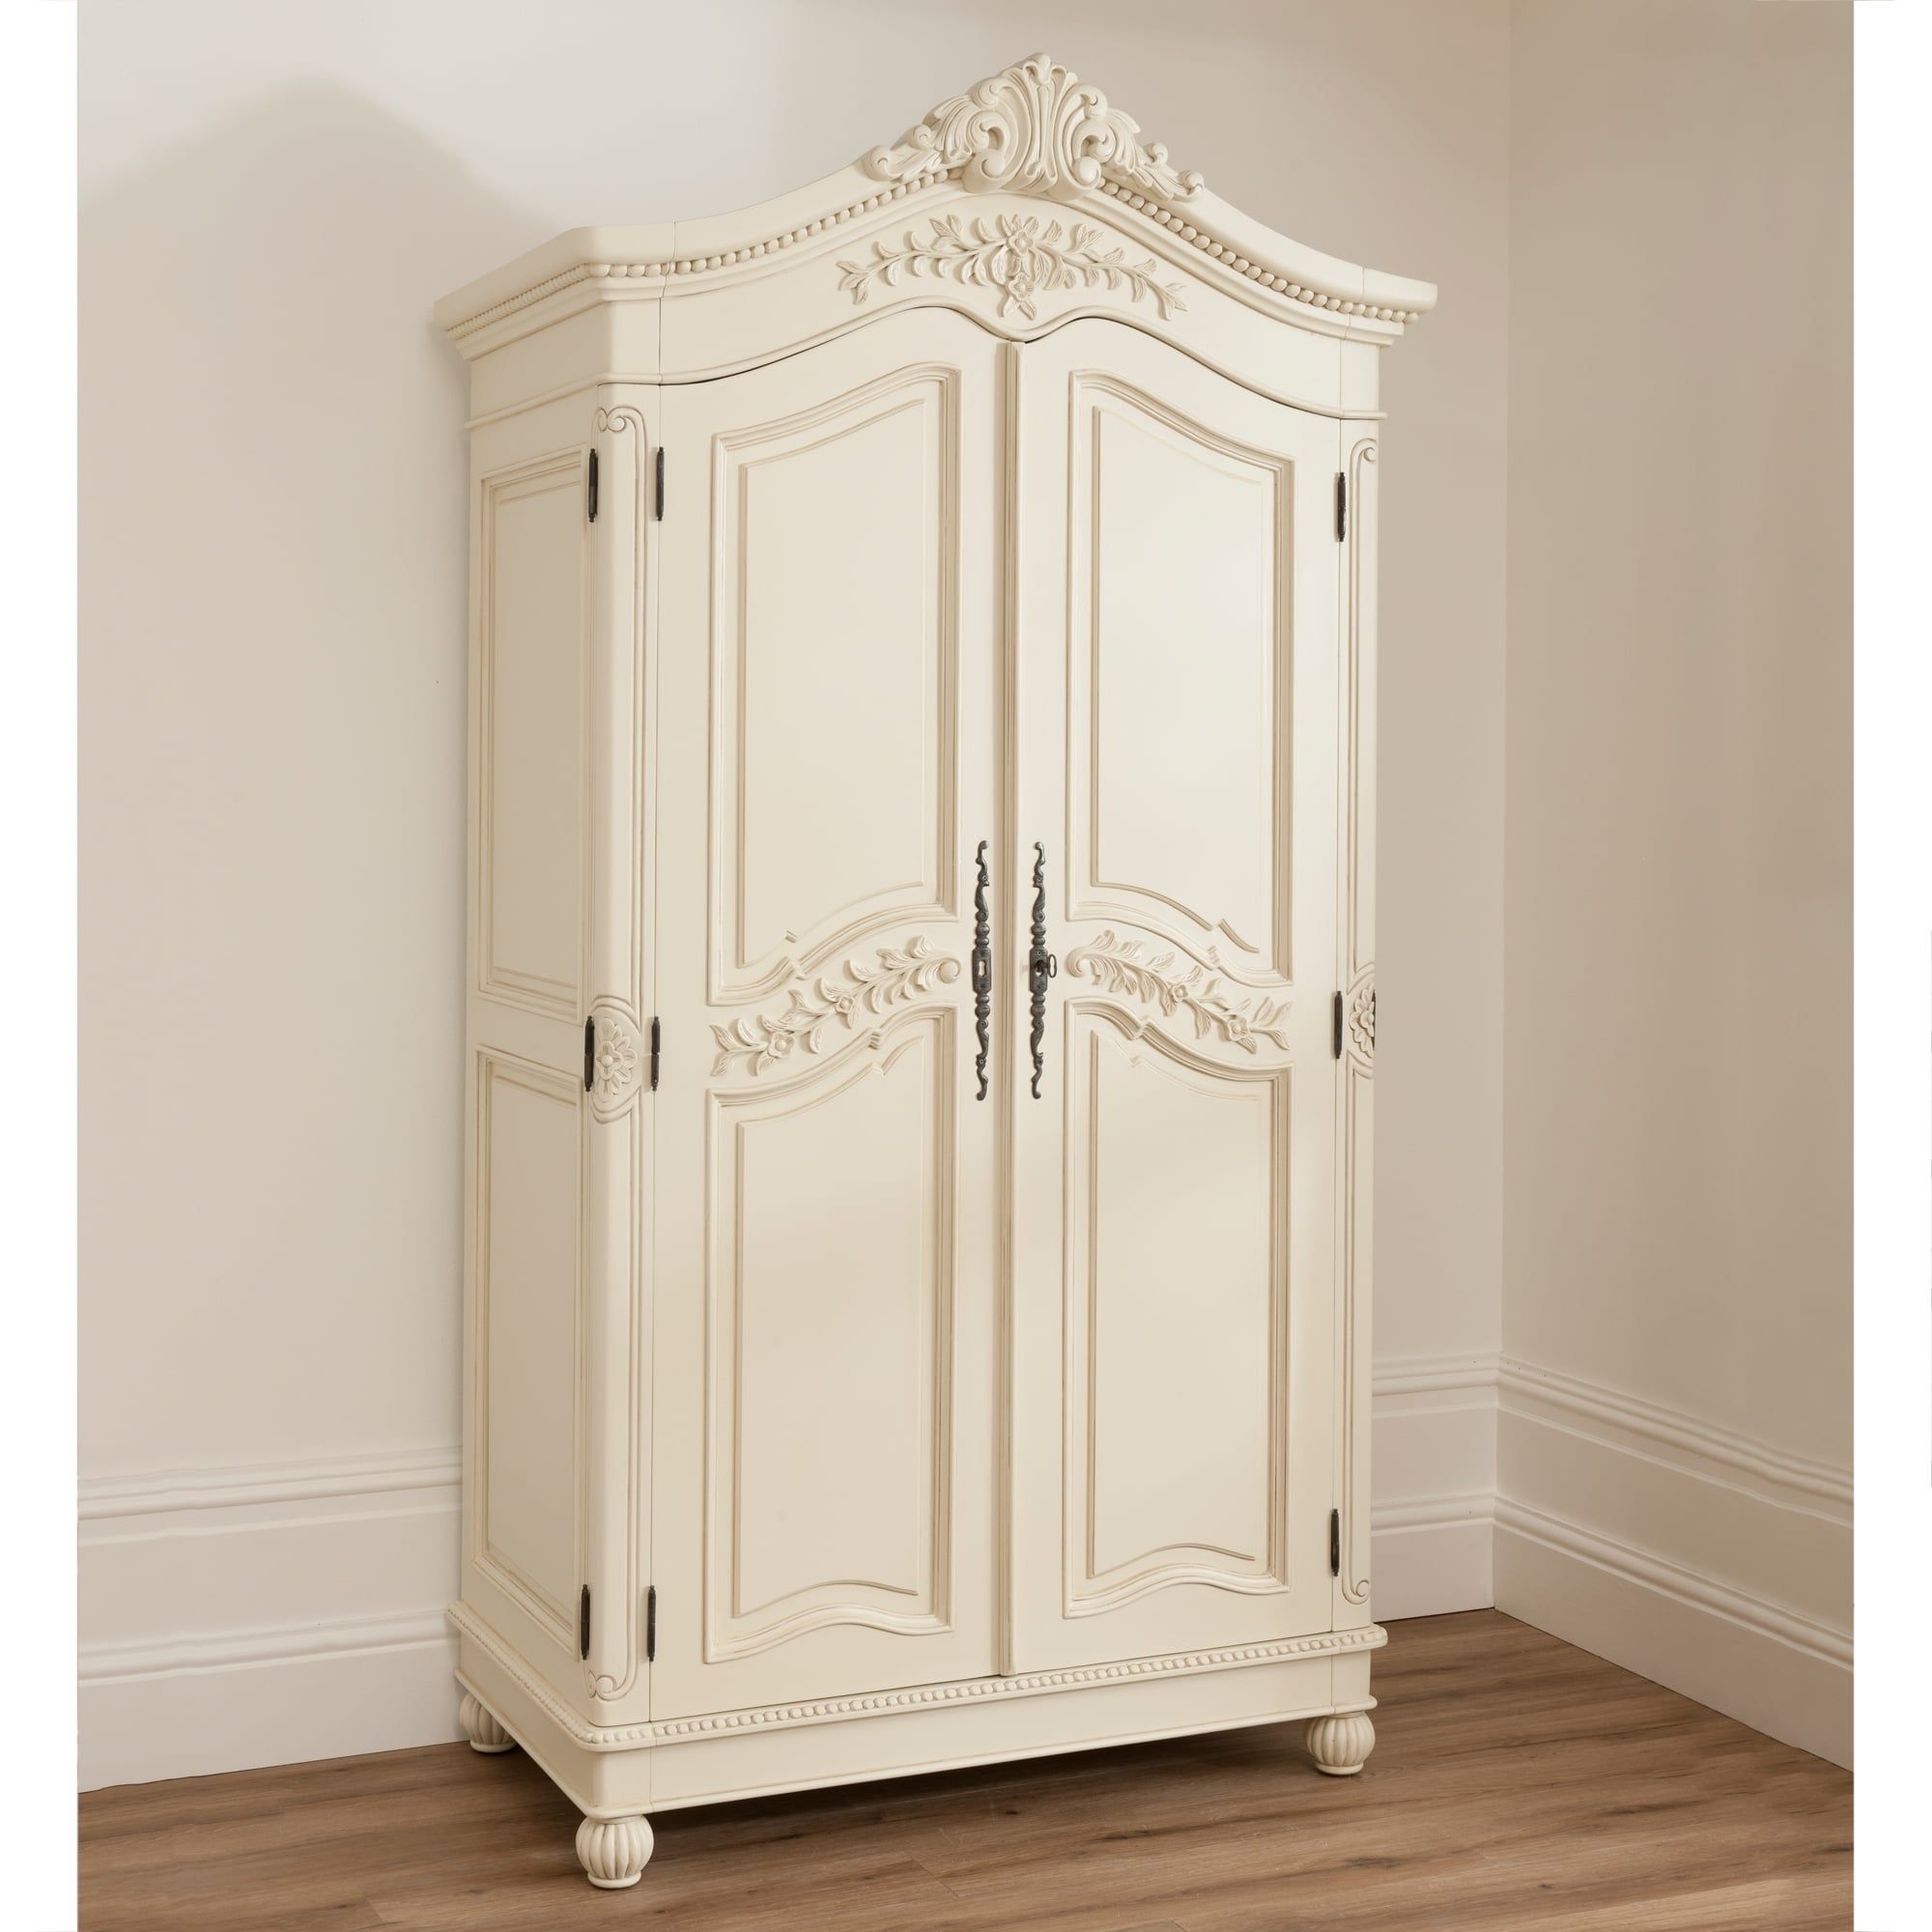 Shabby Chic Wardrobe For Your New Modern Lifestyle – Darbylanefurniture  | Shabby Chic Wardrobe, Shabby Chic Bathroom, Shabby Chic Curtains With Shabby Chic Wardrobes (View 4 of 15)